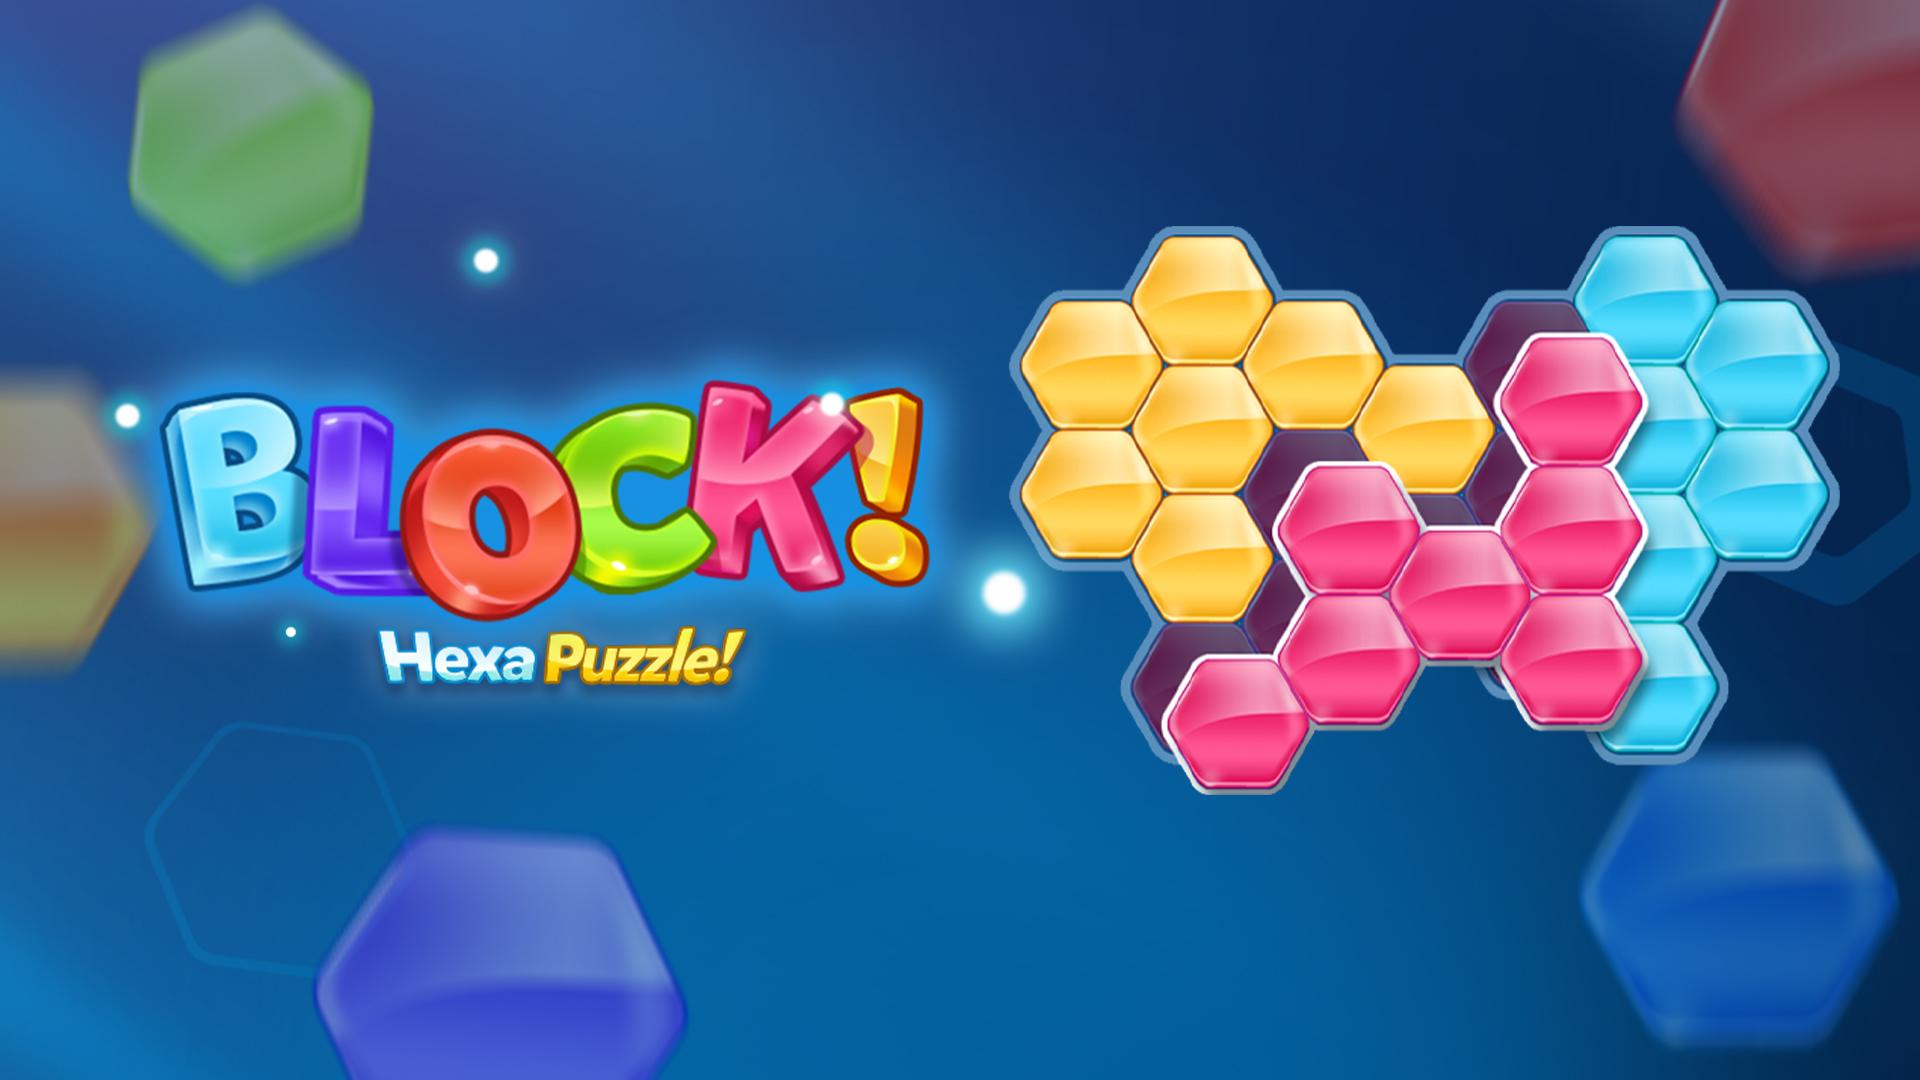 Bloques! Puzle Hexagonal for Android - APK Download